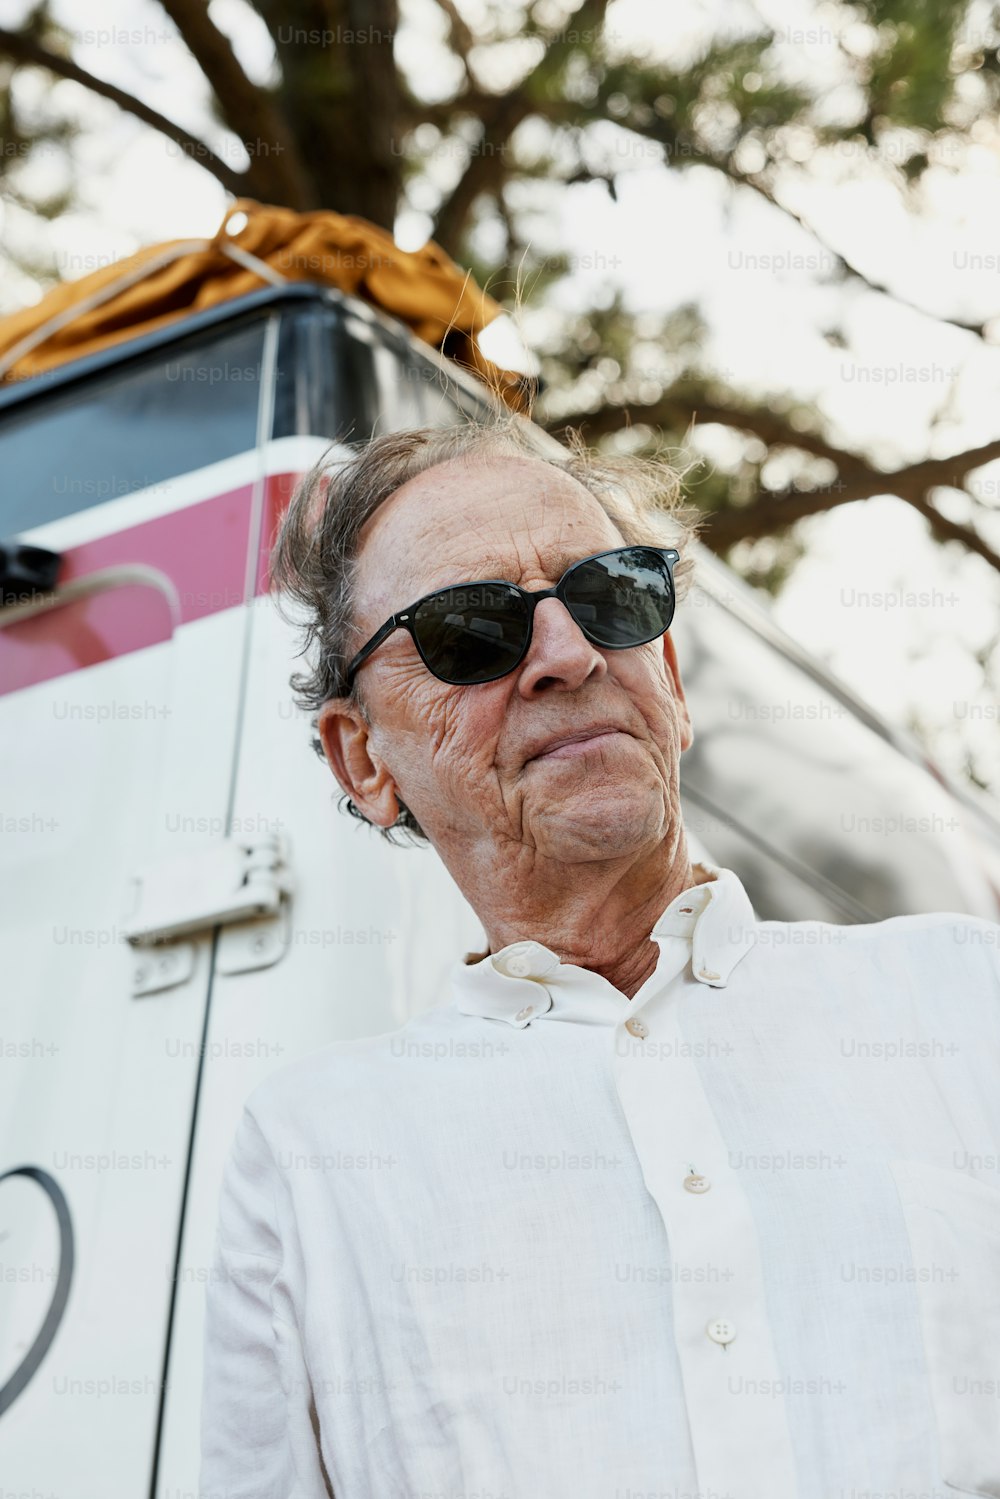 an old man wearing sunglasses standing in front of a bus